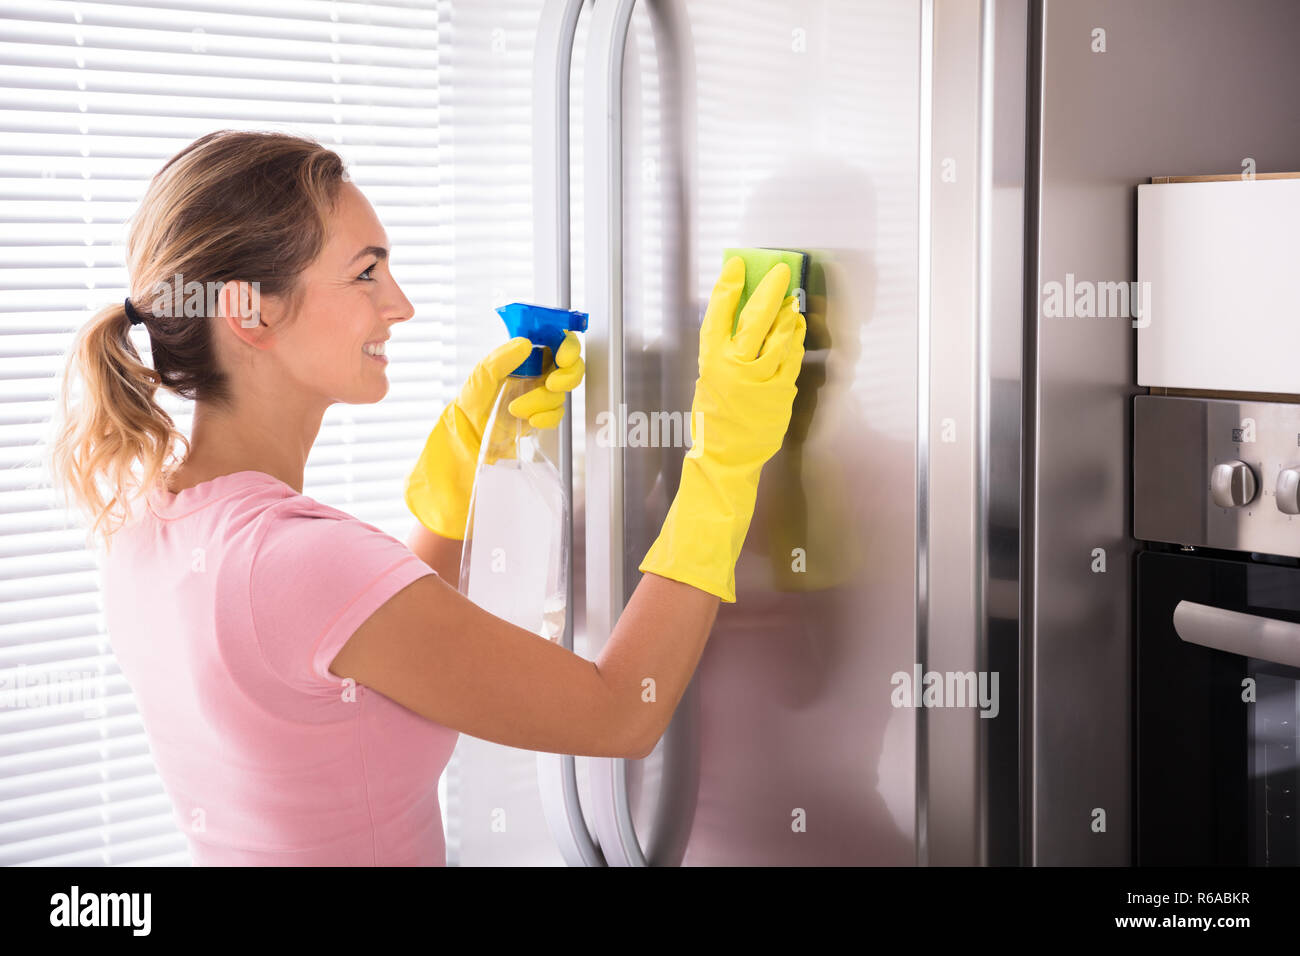 Young Woman Cleaning Stainless Refrigerator Stock Photo